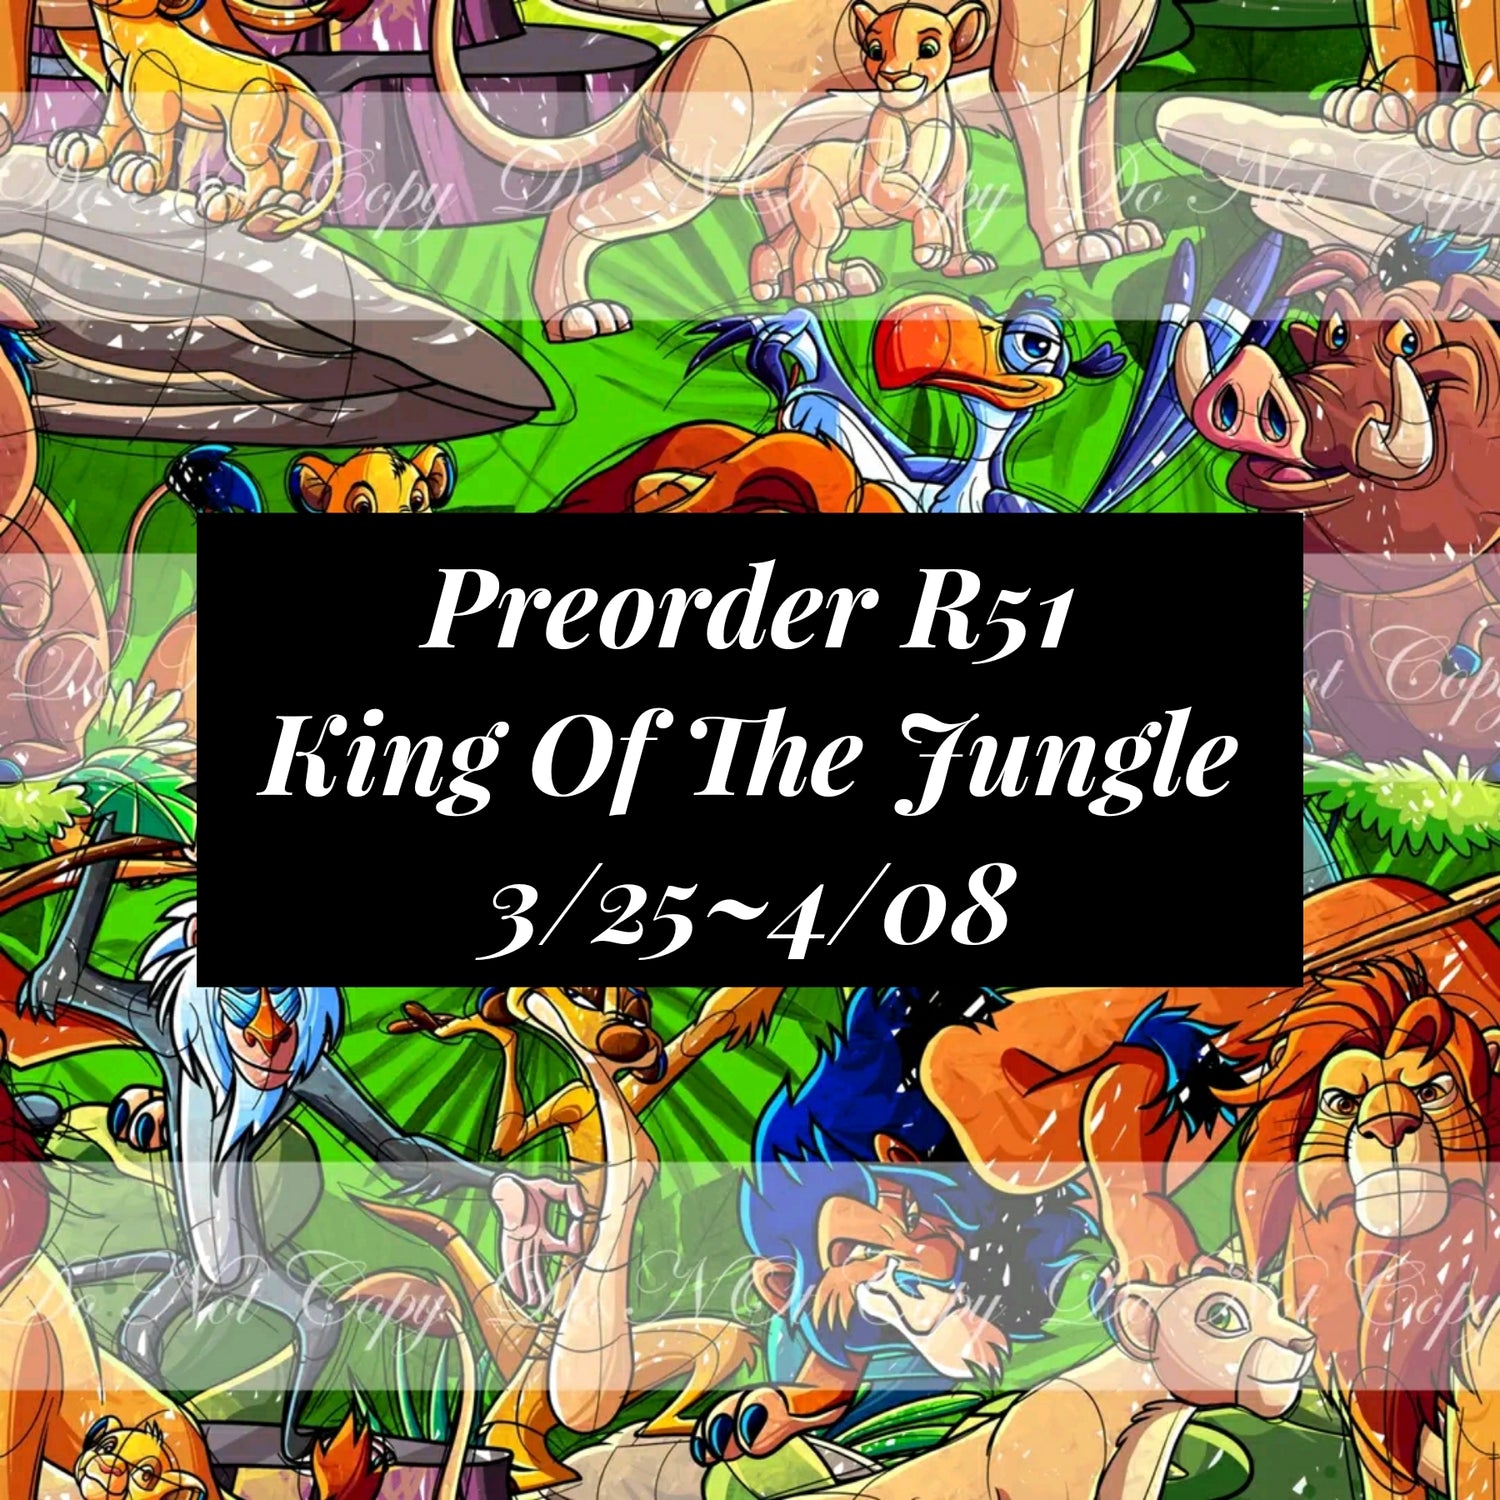 Preorder R51 King Of The Jungle